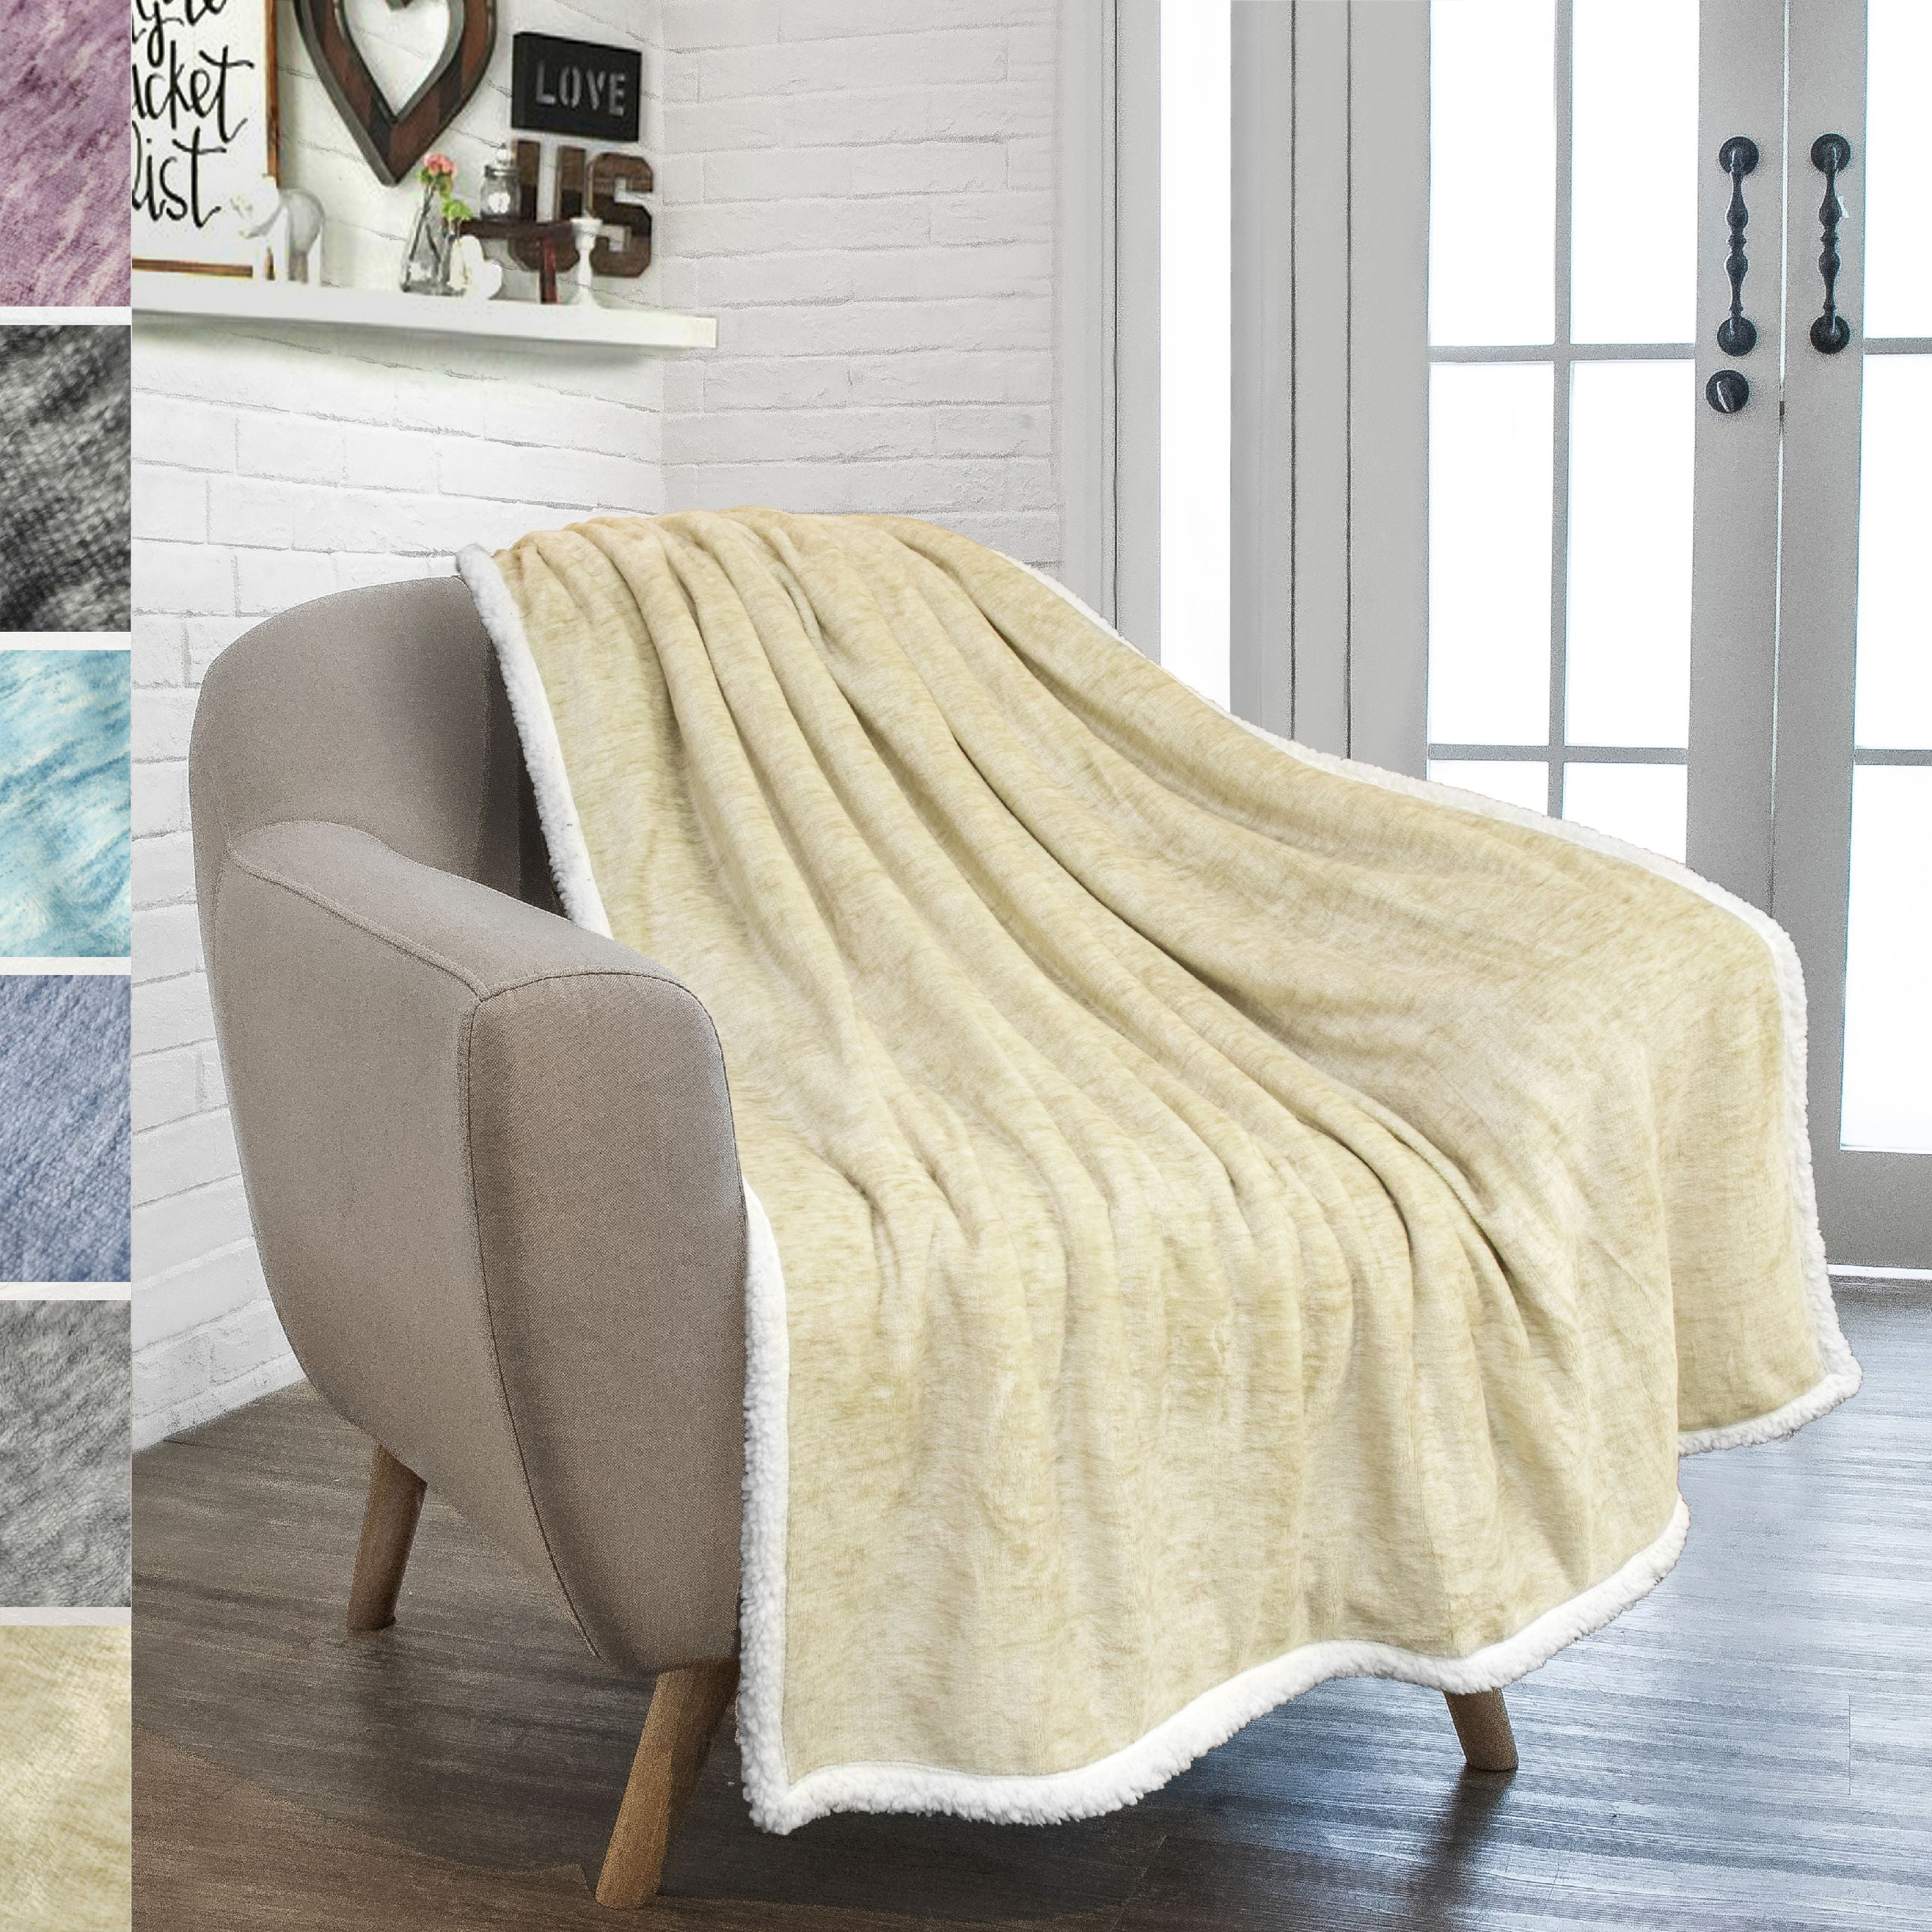 Details about   Fuzzy Cozy Throw Blanket with Fluffy Sherpa Fleece for Sofa Couch Birthday Gifts 